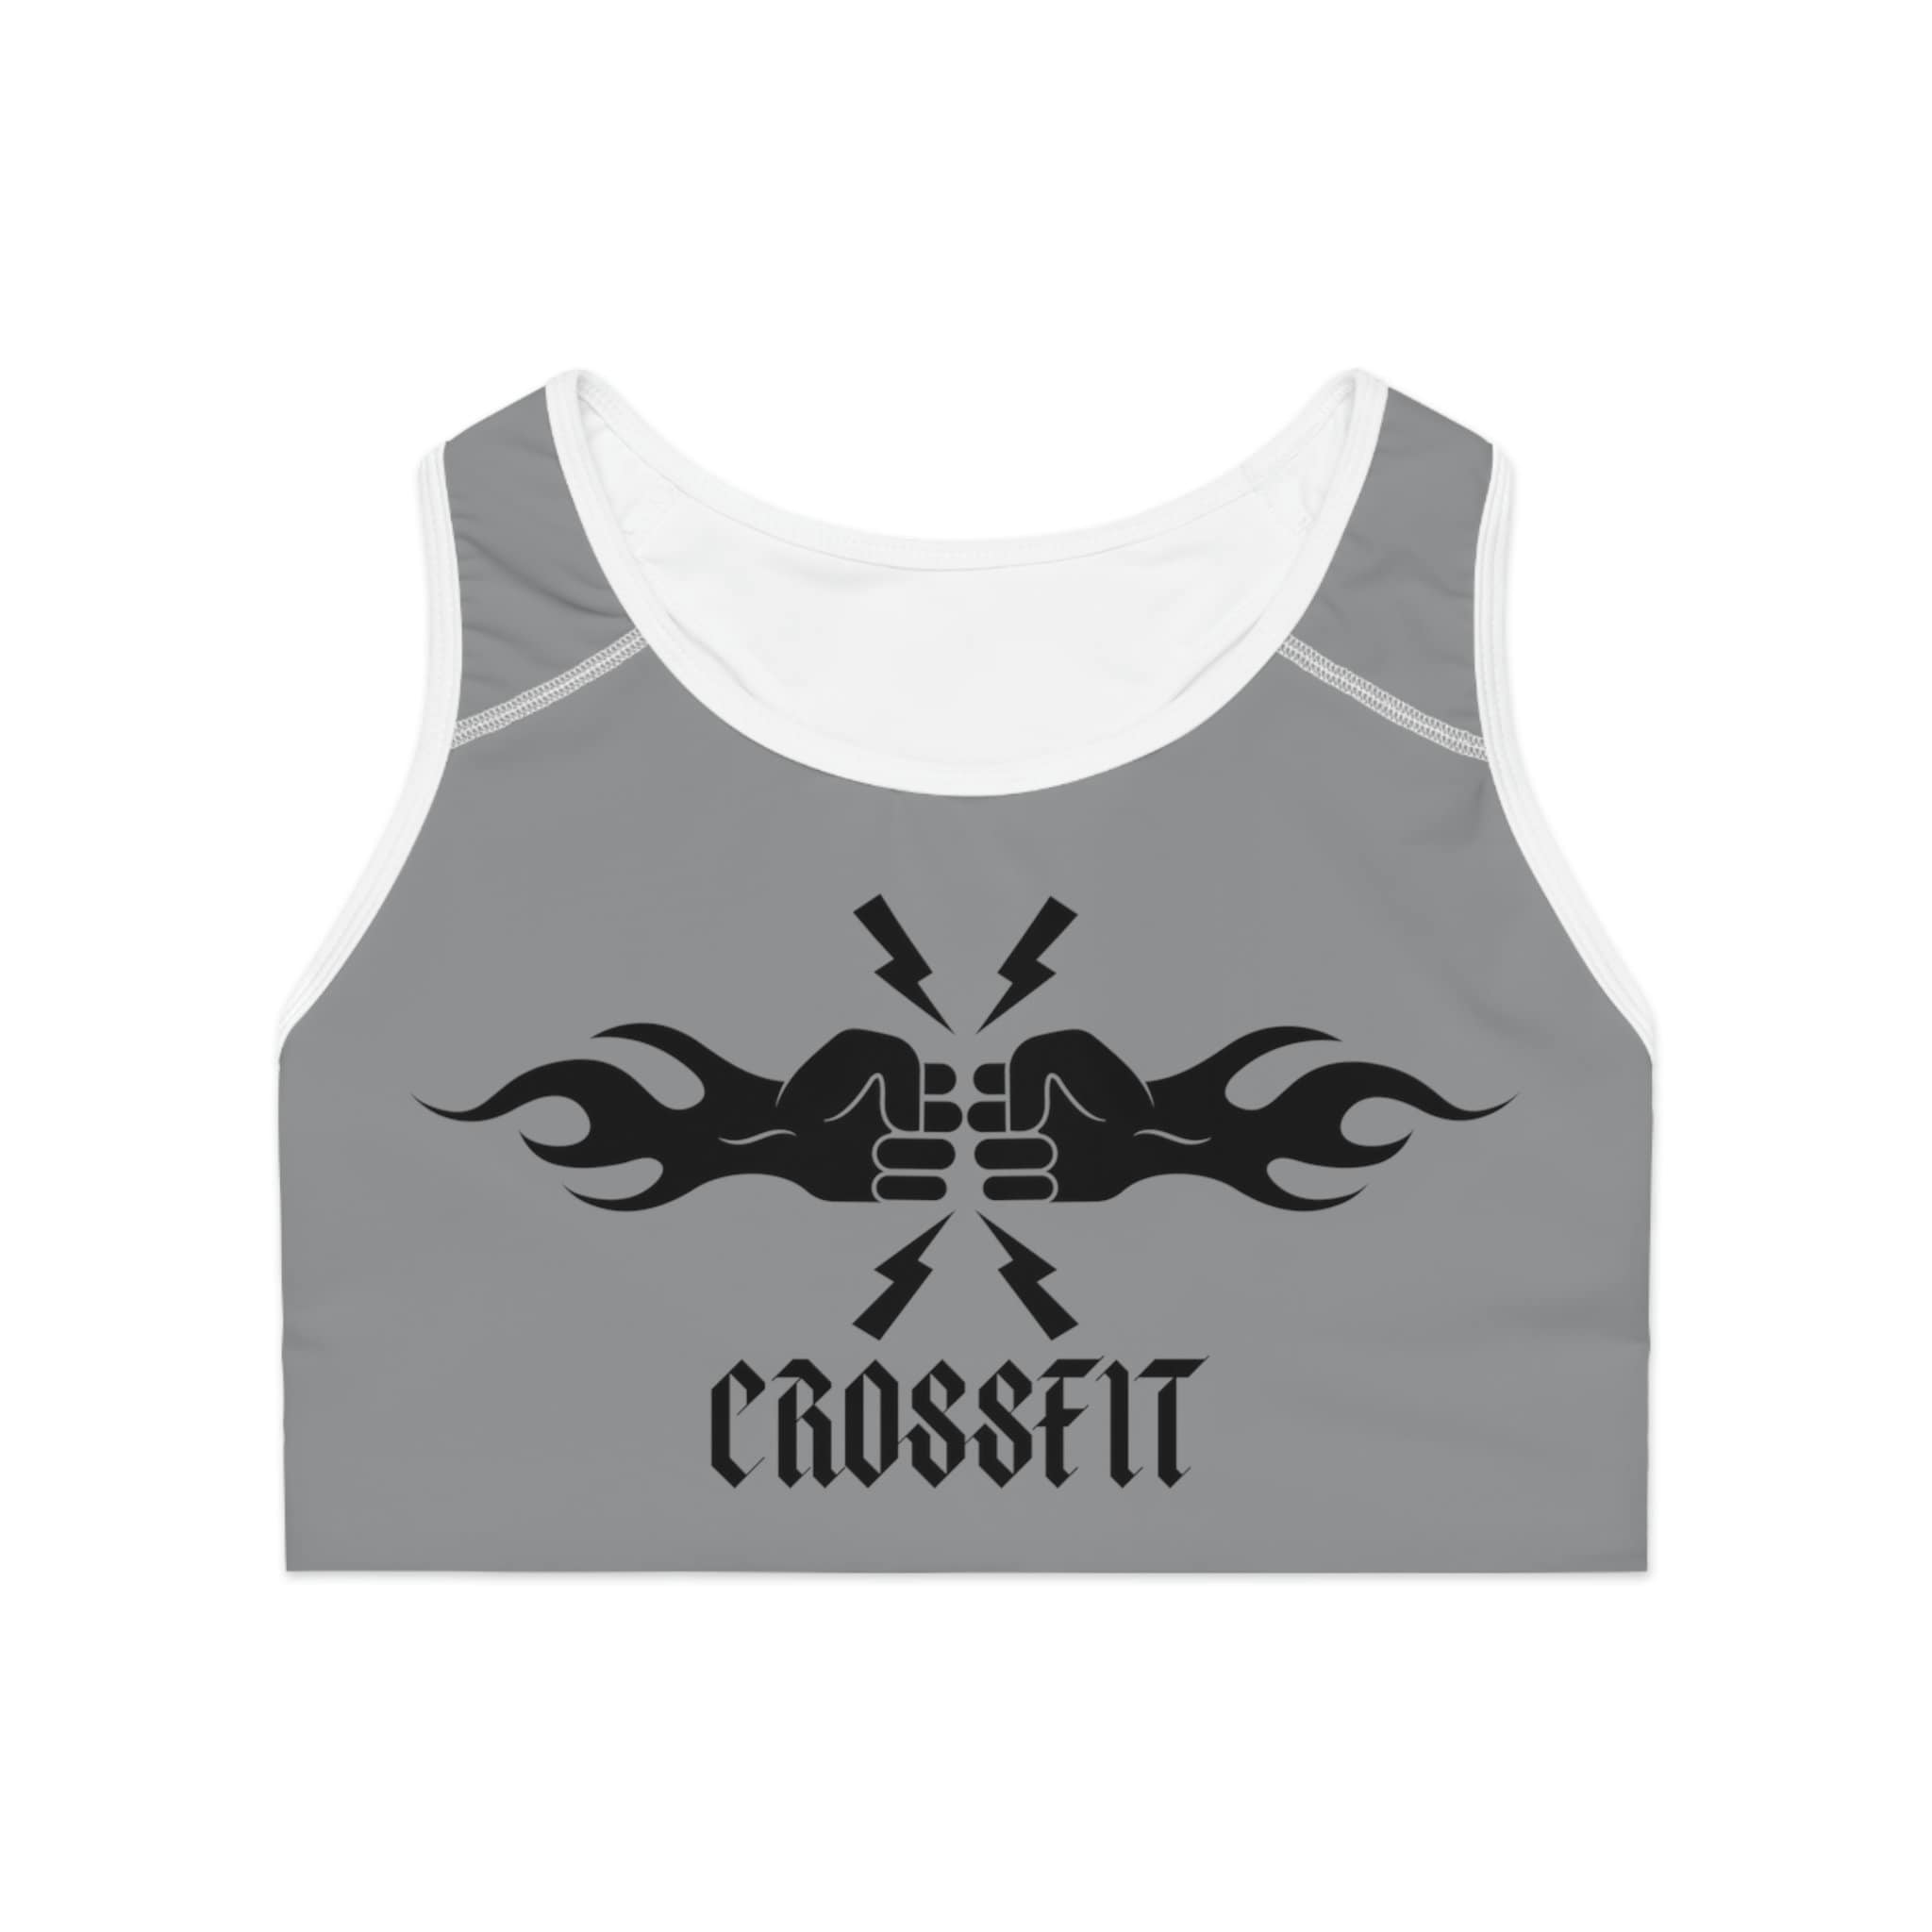 Crossfit Sports Bra. Perfect for Gym Home Running Jogging Crossfit